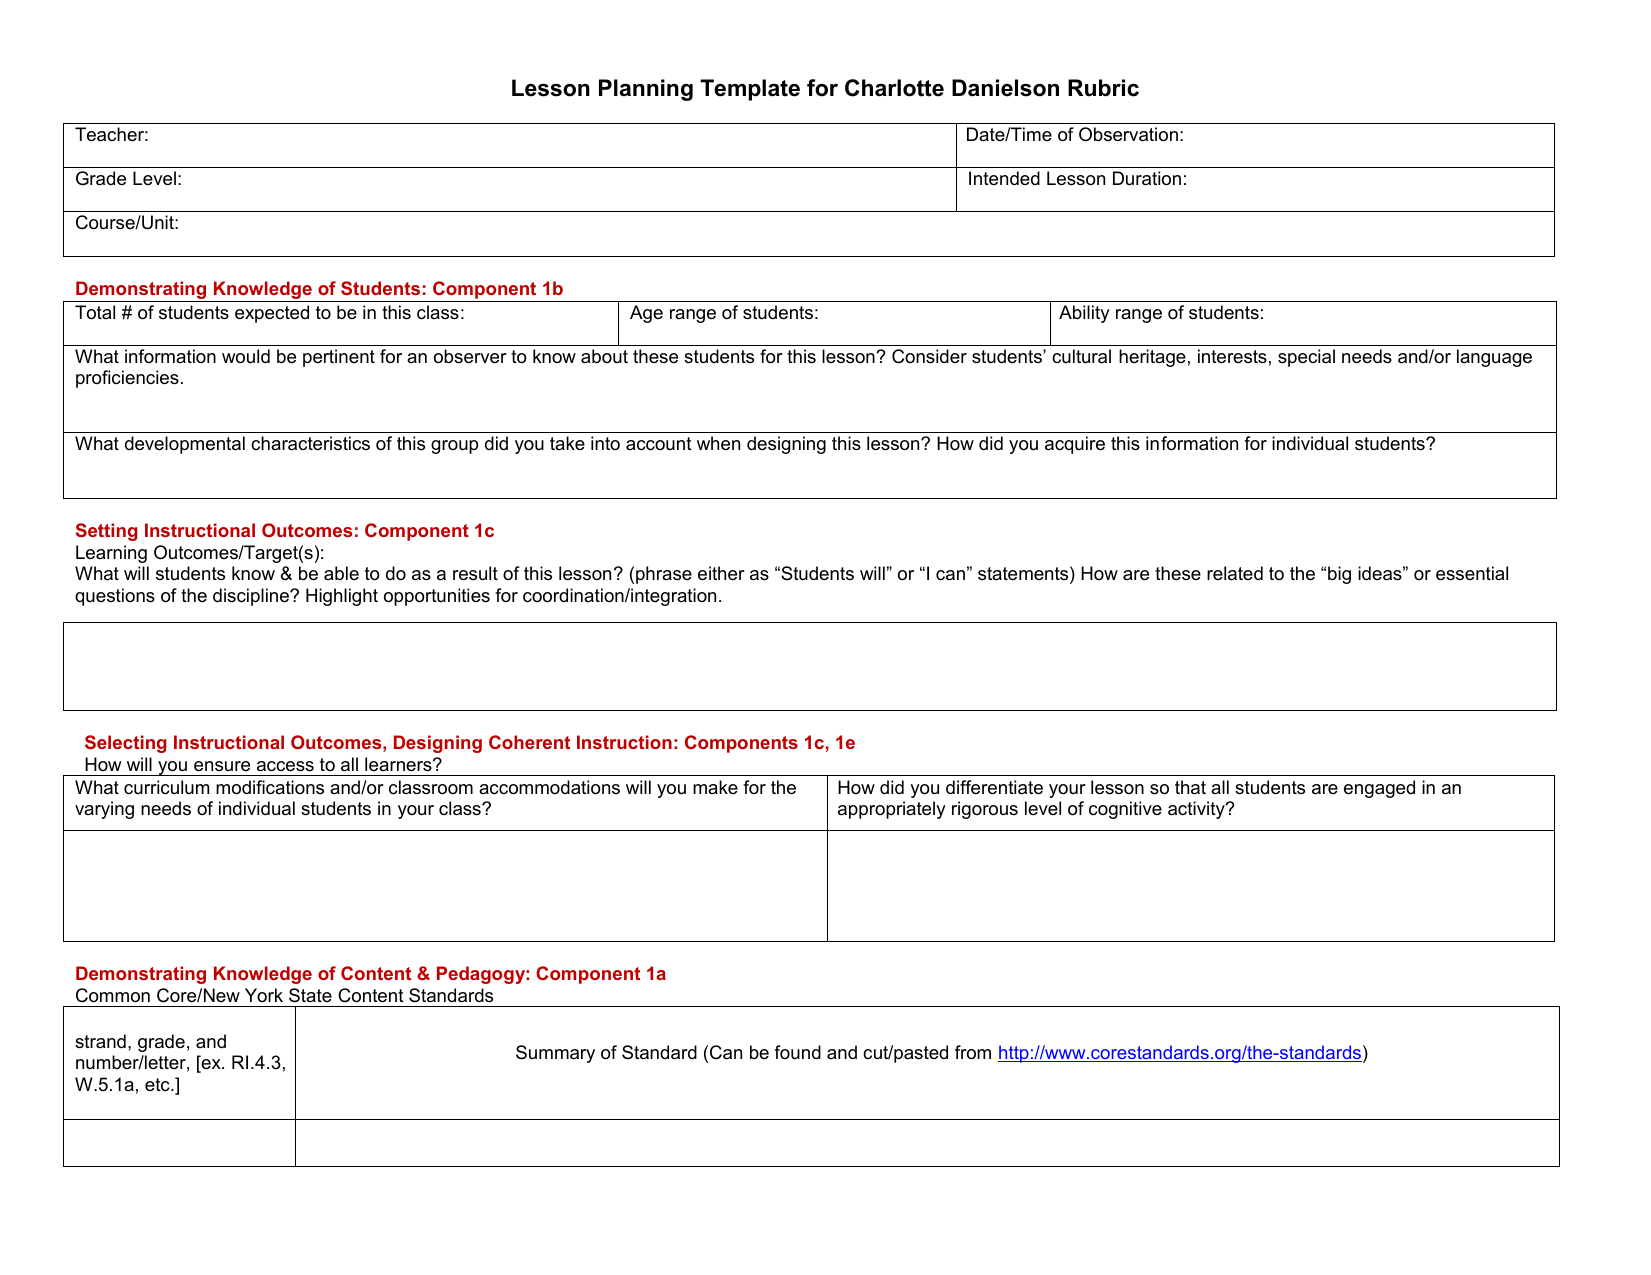 Pre Observation Lesson Planning Template Aligned With Fft Rubric A lesson observation form is a document that practice teachers use in order to state their observations of the basic roundabouts in a classroom. pre observation lesson planning